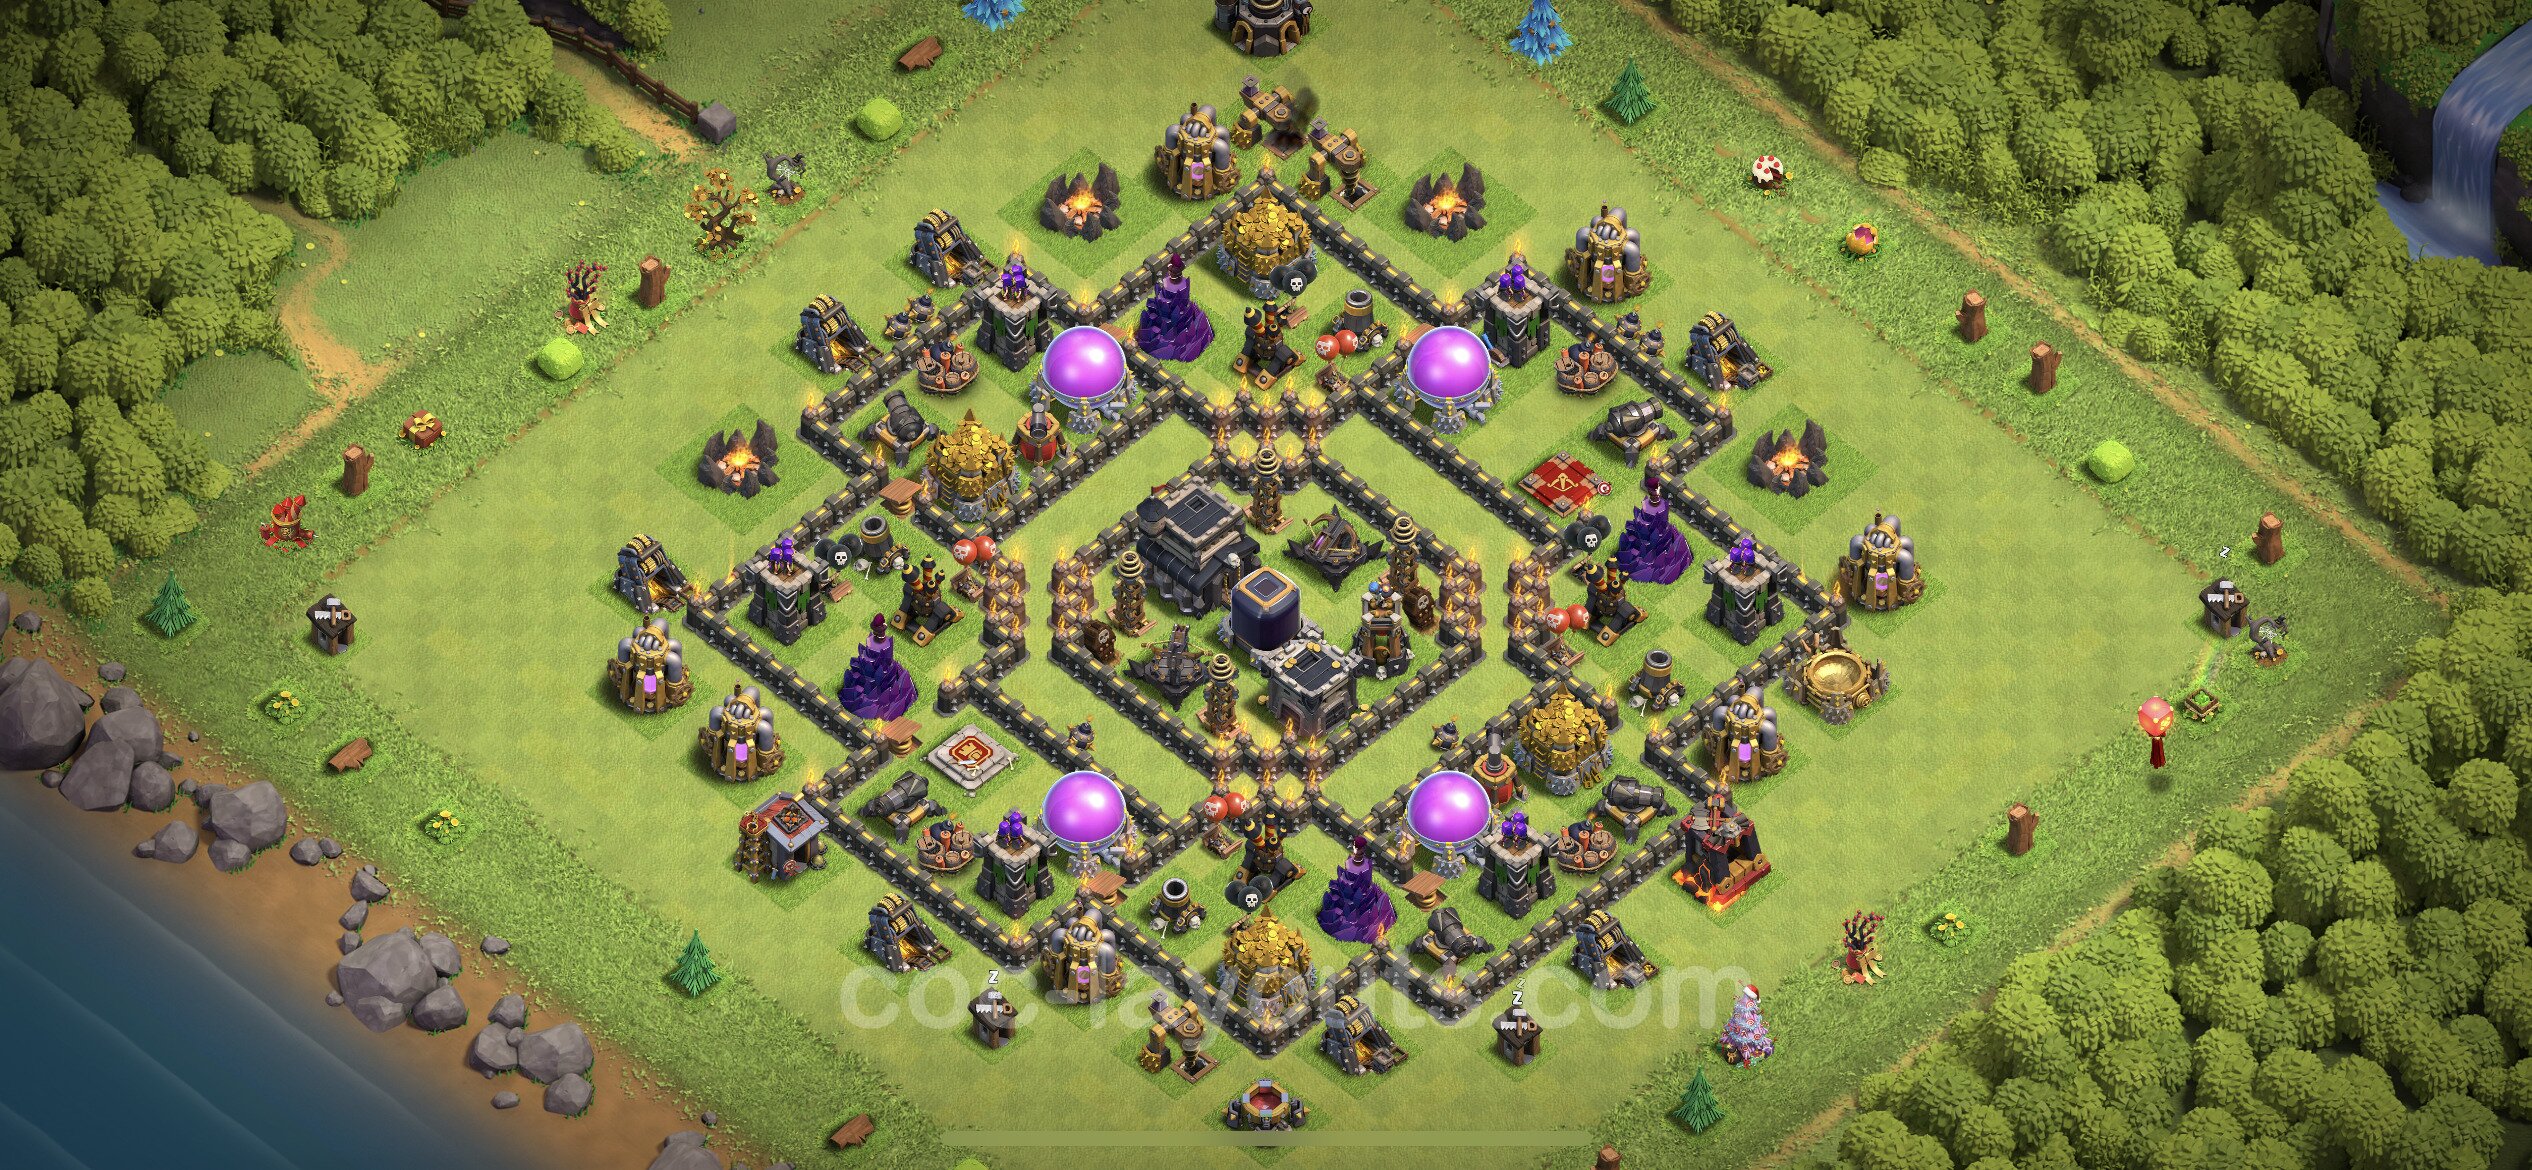 Maxed out th9